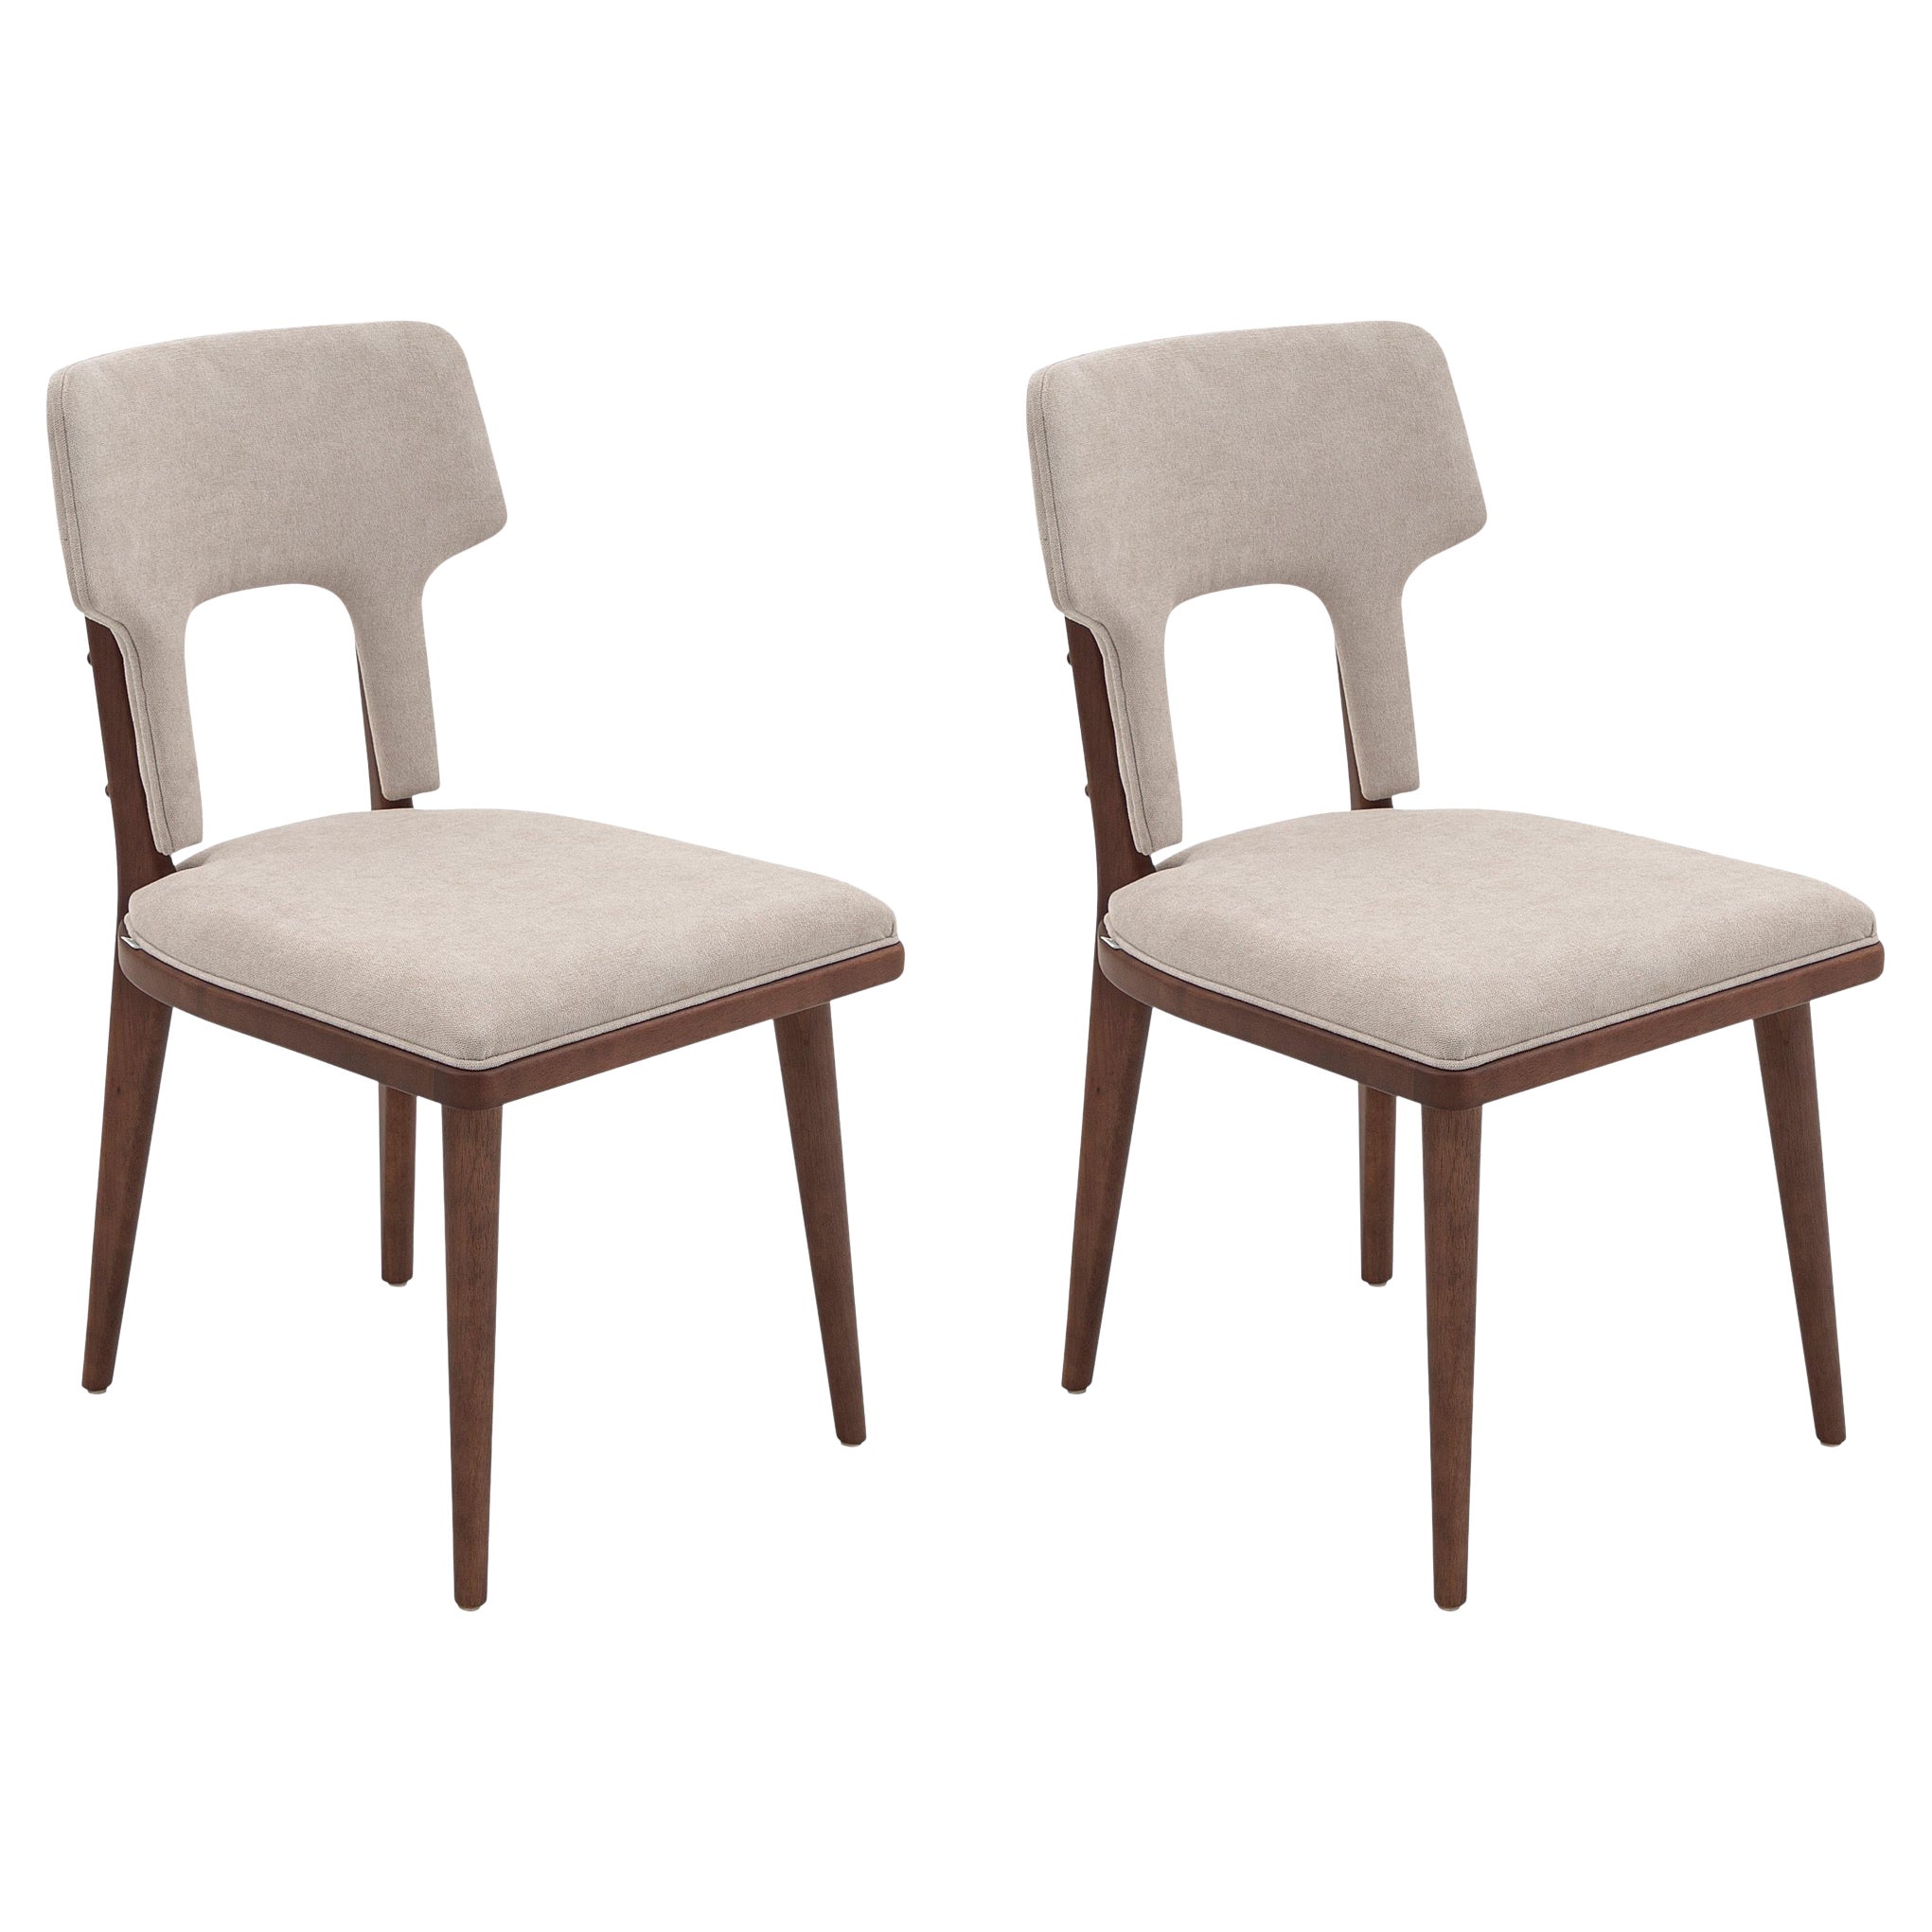 Fork Dining Chair in Light Beige Fabric and Walnut Wood Finish, Set of 2